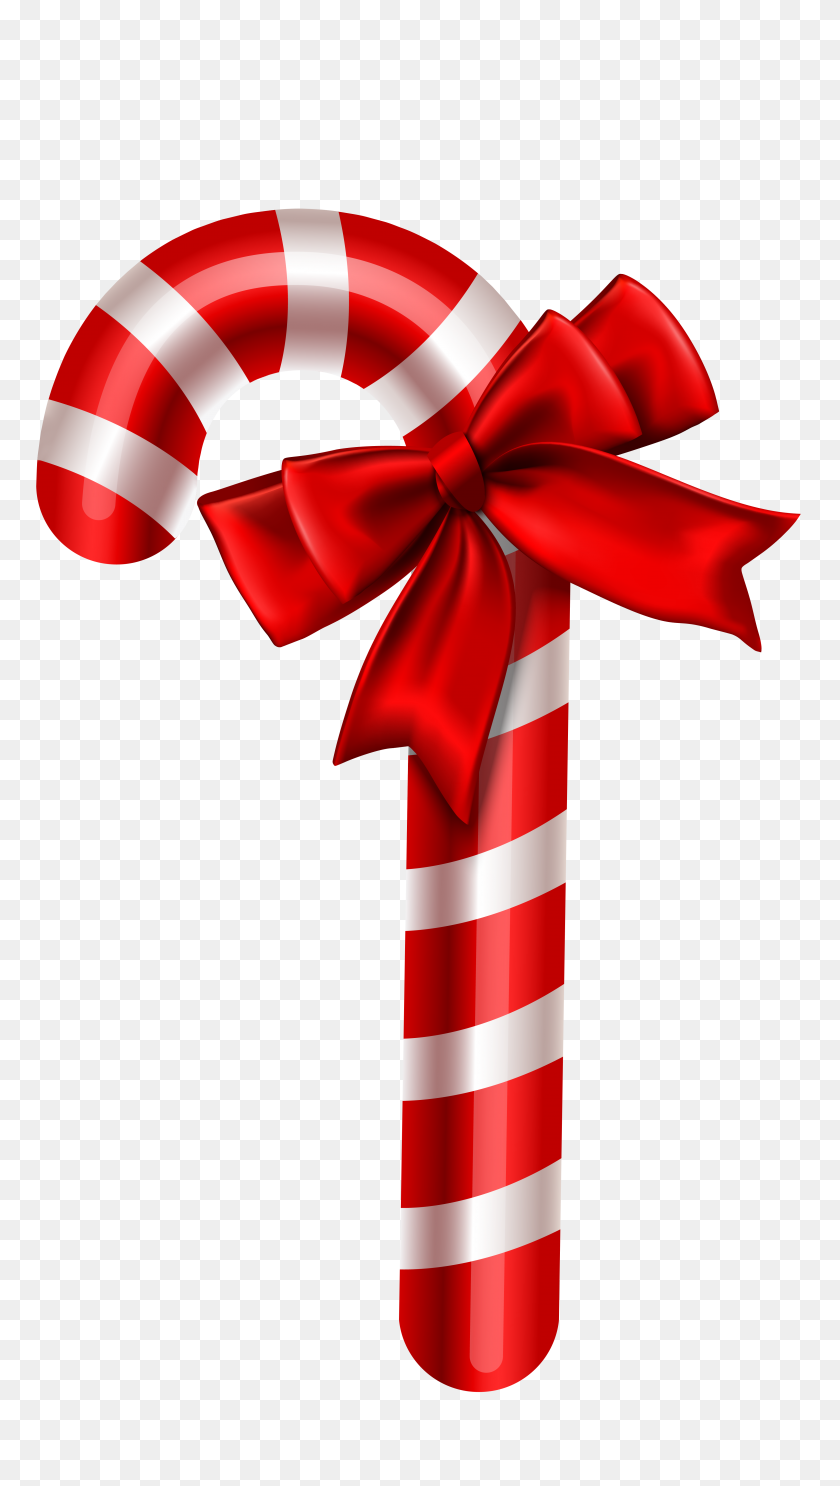 3987x7294 Candy Cane Christmas Ornament Png Clipart Gallery - Ornament Clipart